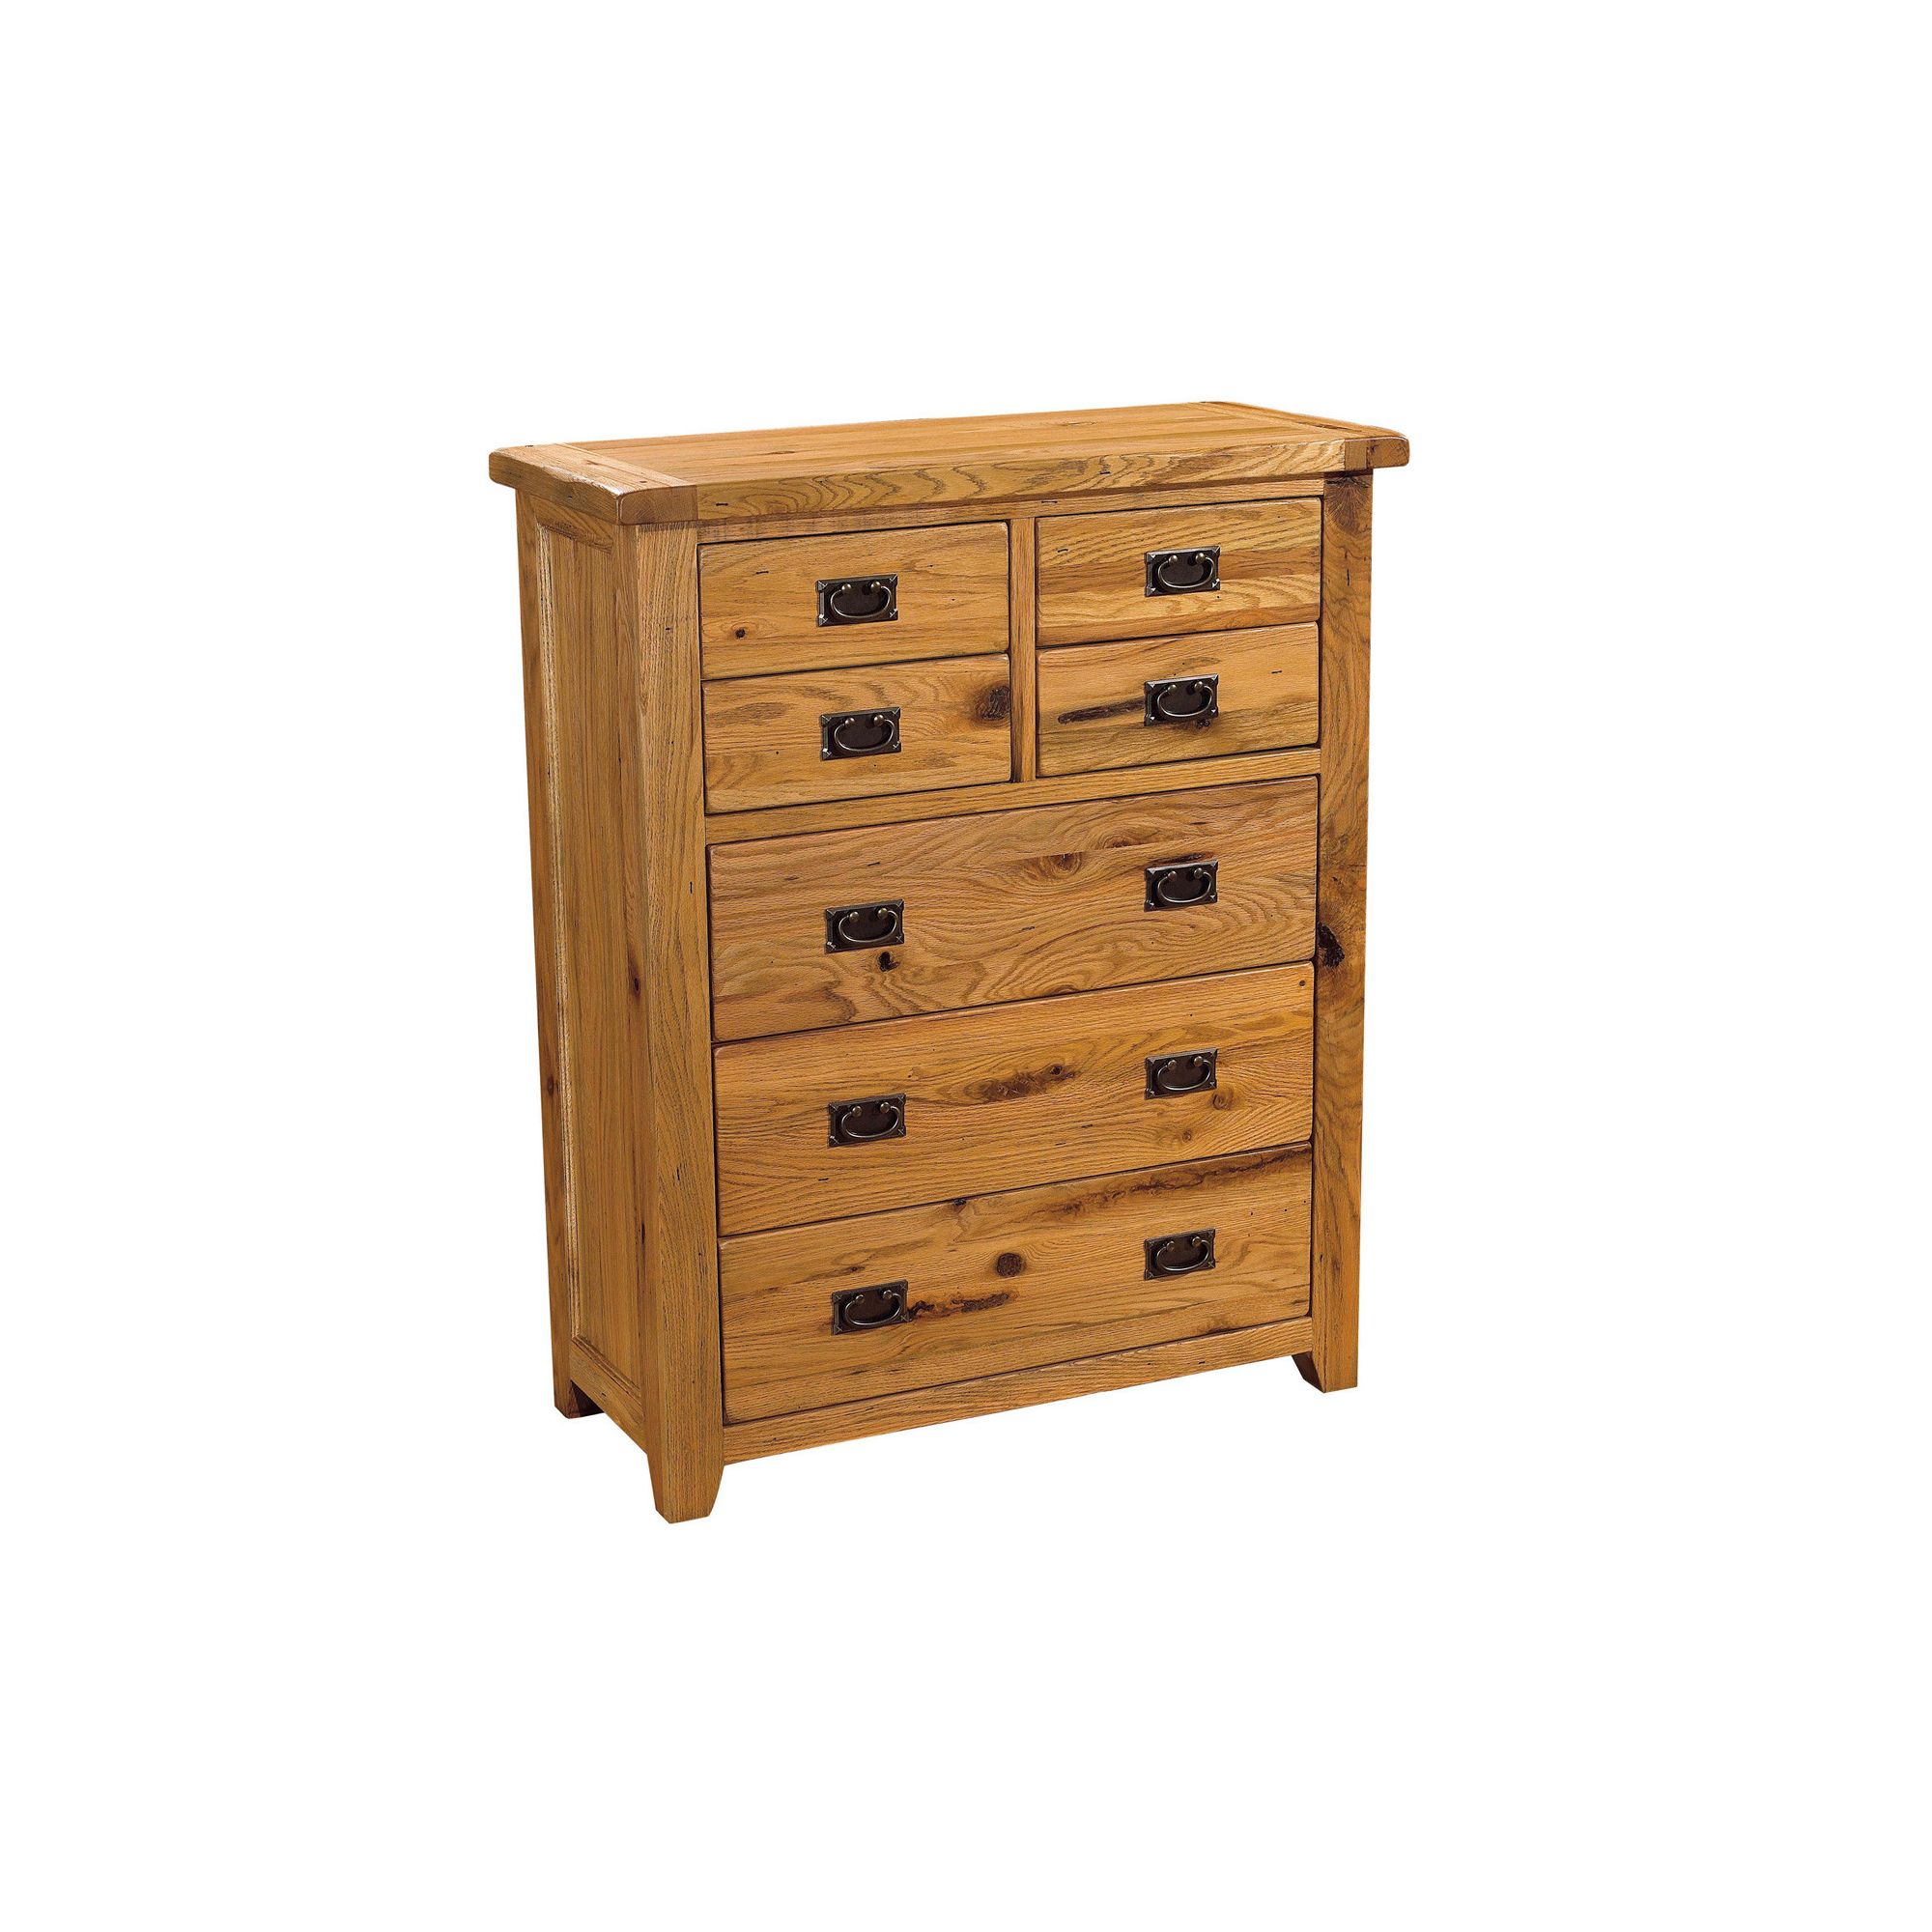 Kelburn Furniture Parnell 4 Over 3 Chest of Drawers in Rustic Oak at Tescos Direct